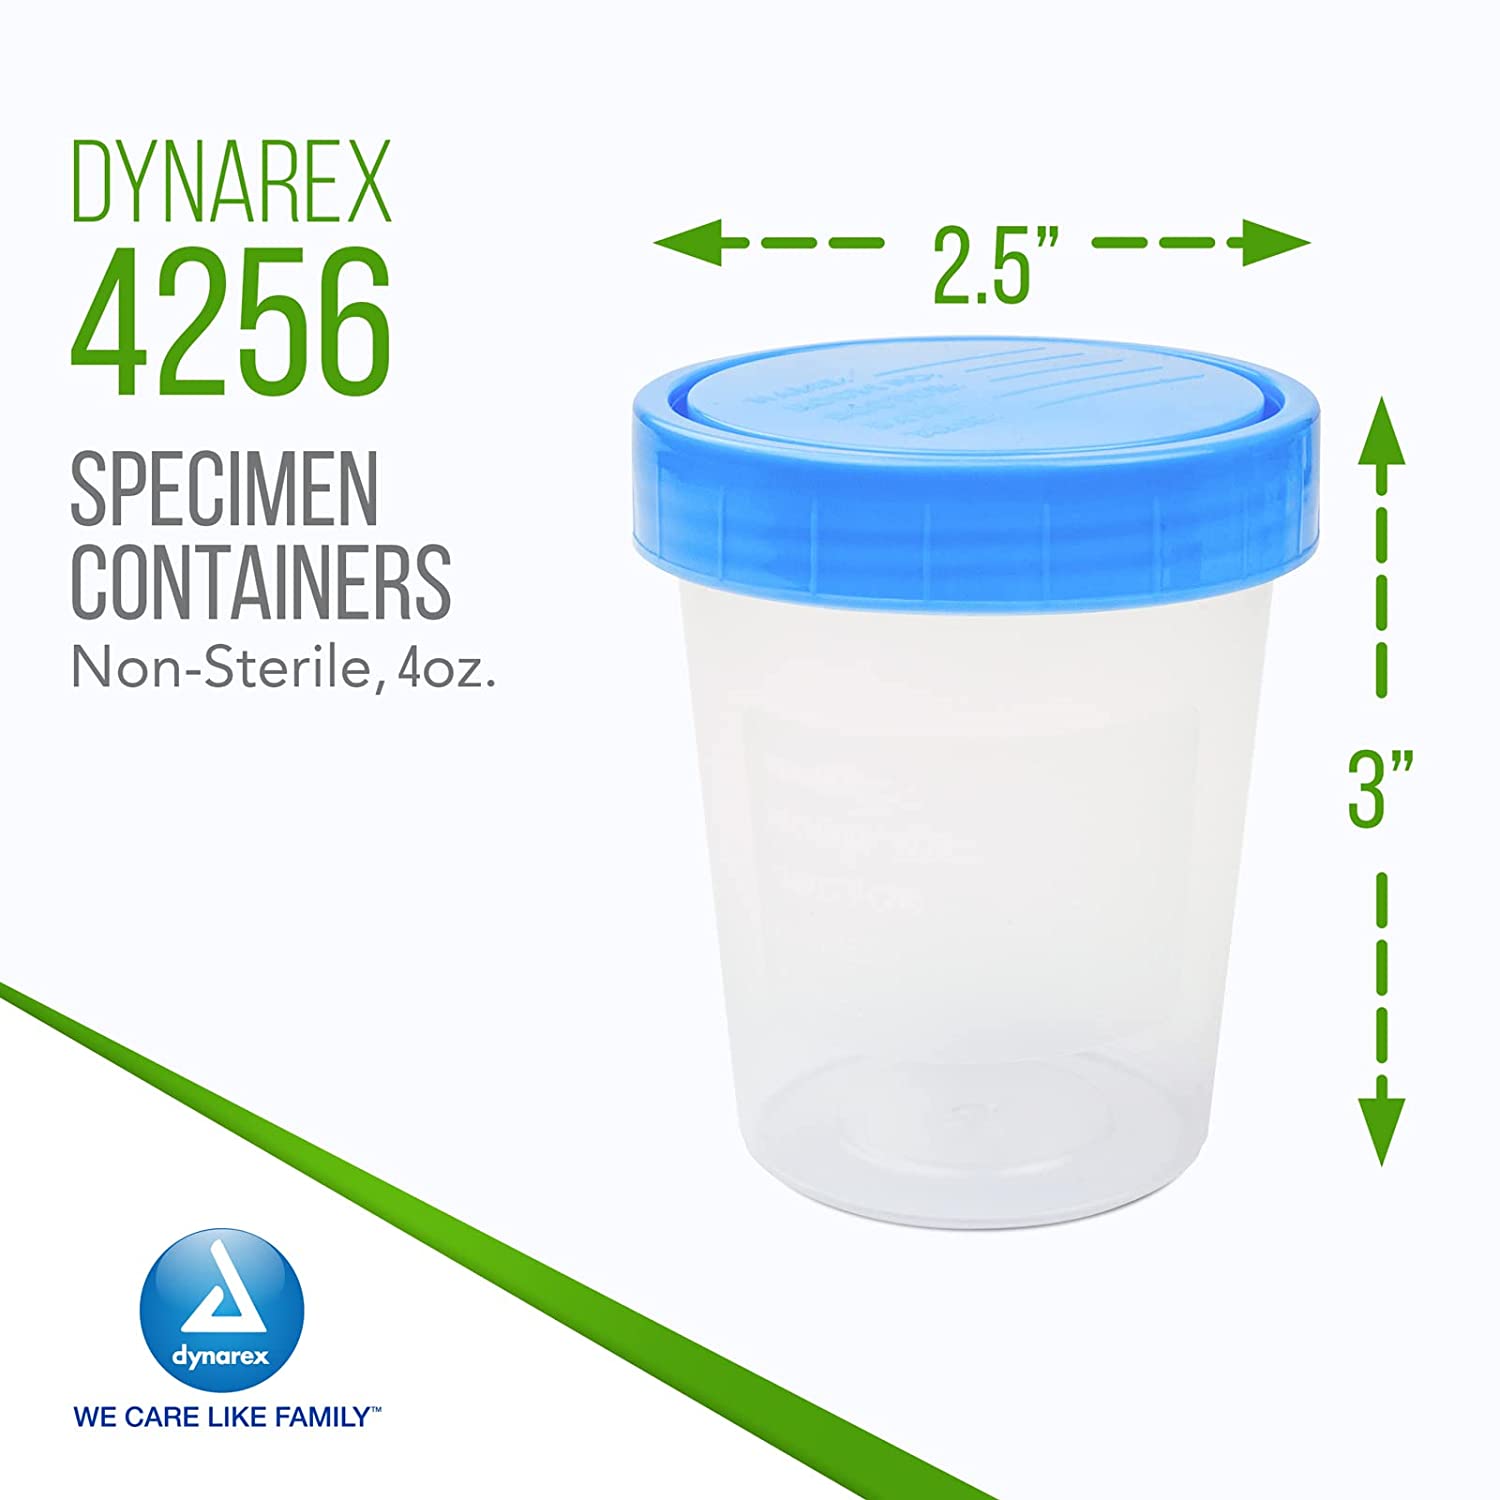 Dynarex Specimen Containers, Non-Sterile, Bulk Packaged Specimen Cups with Lids, Clear with Blue Lid, 1 Box of 500